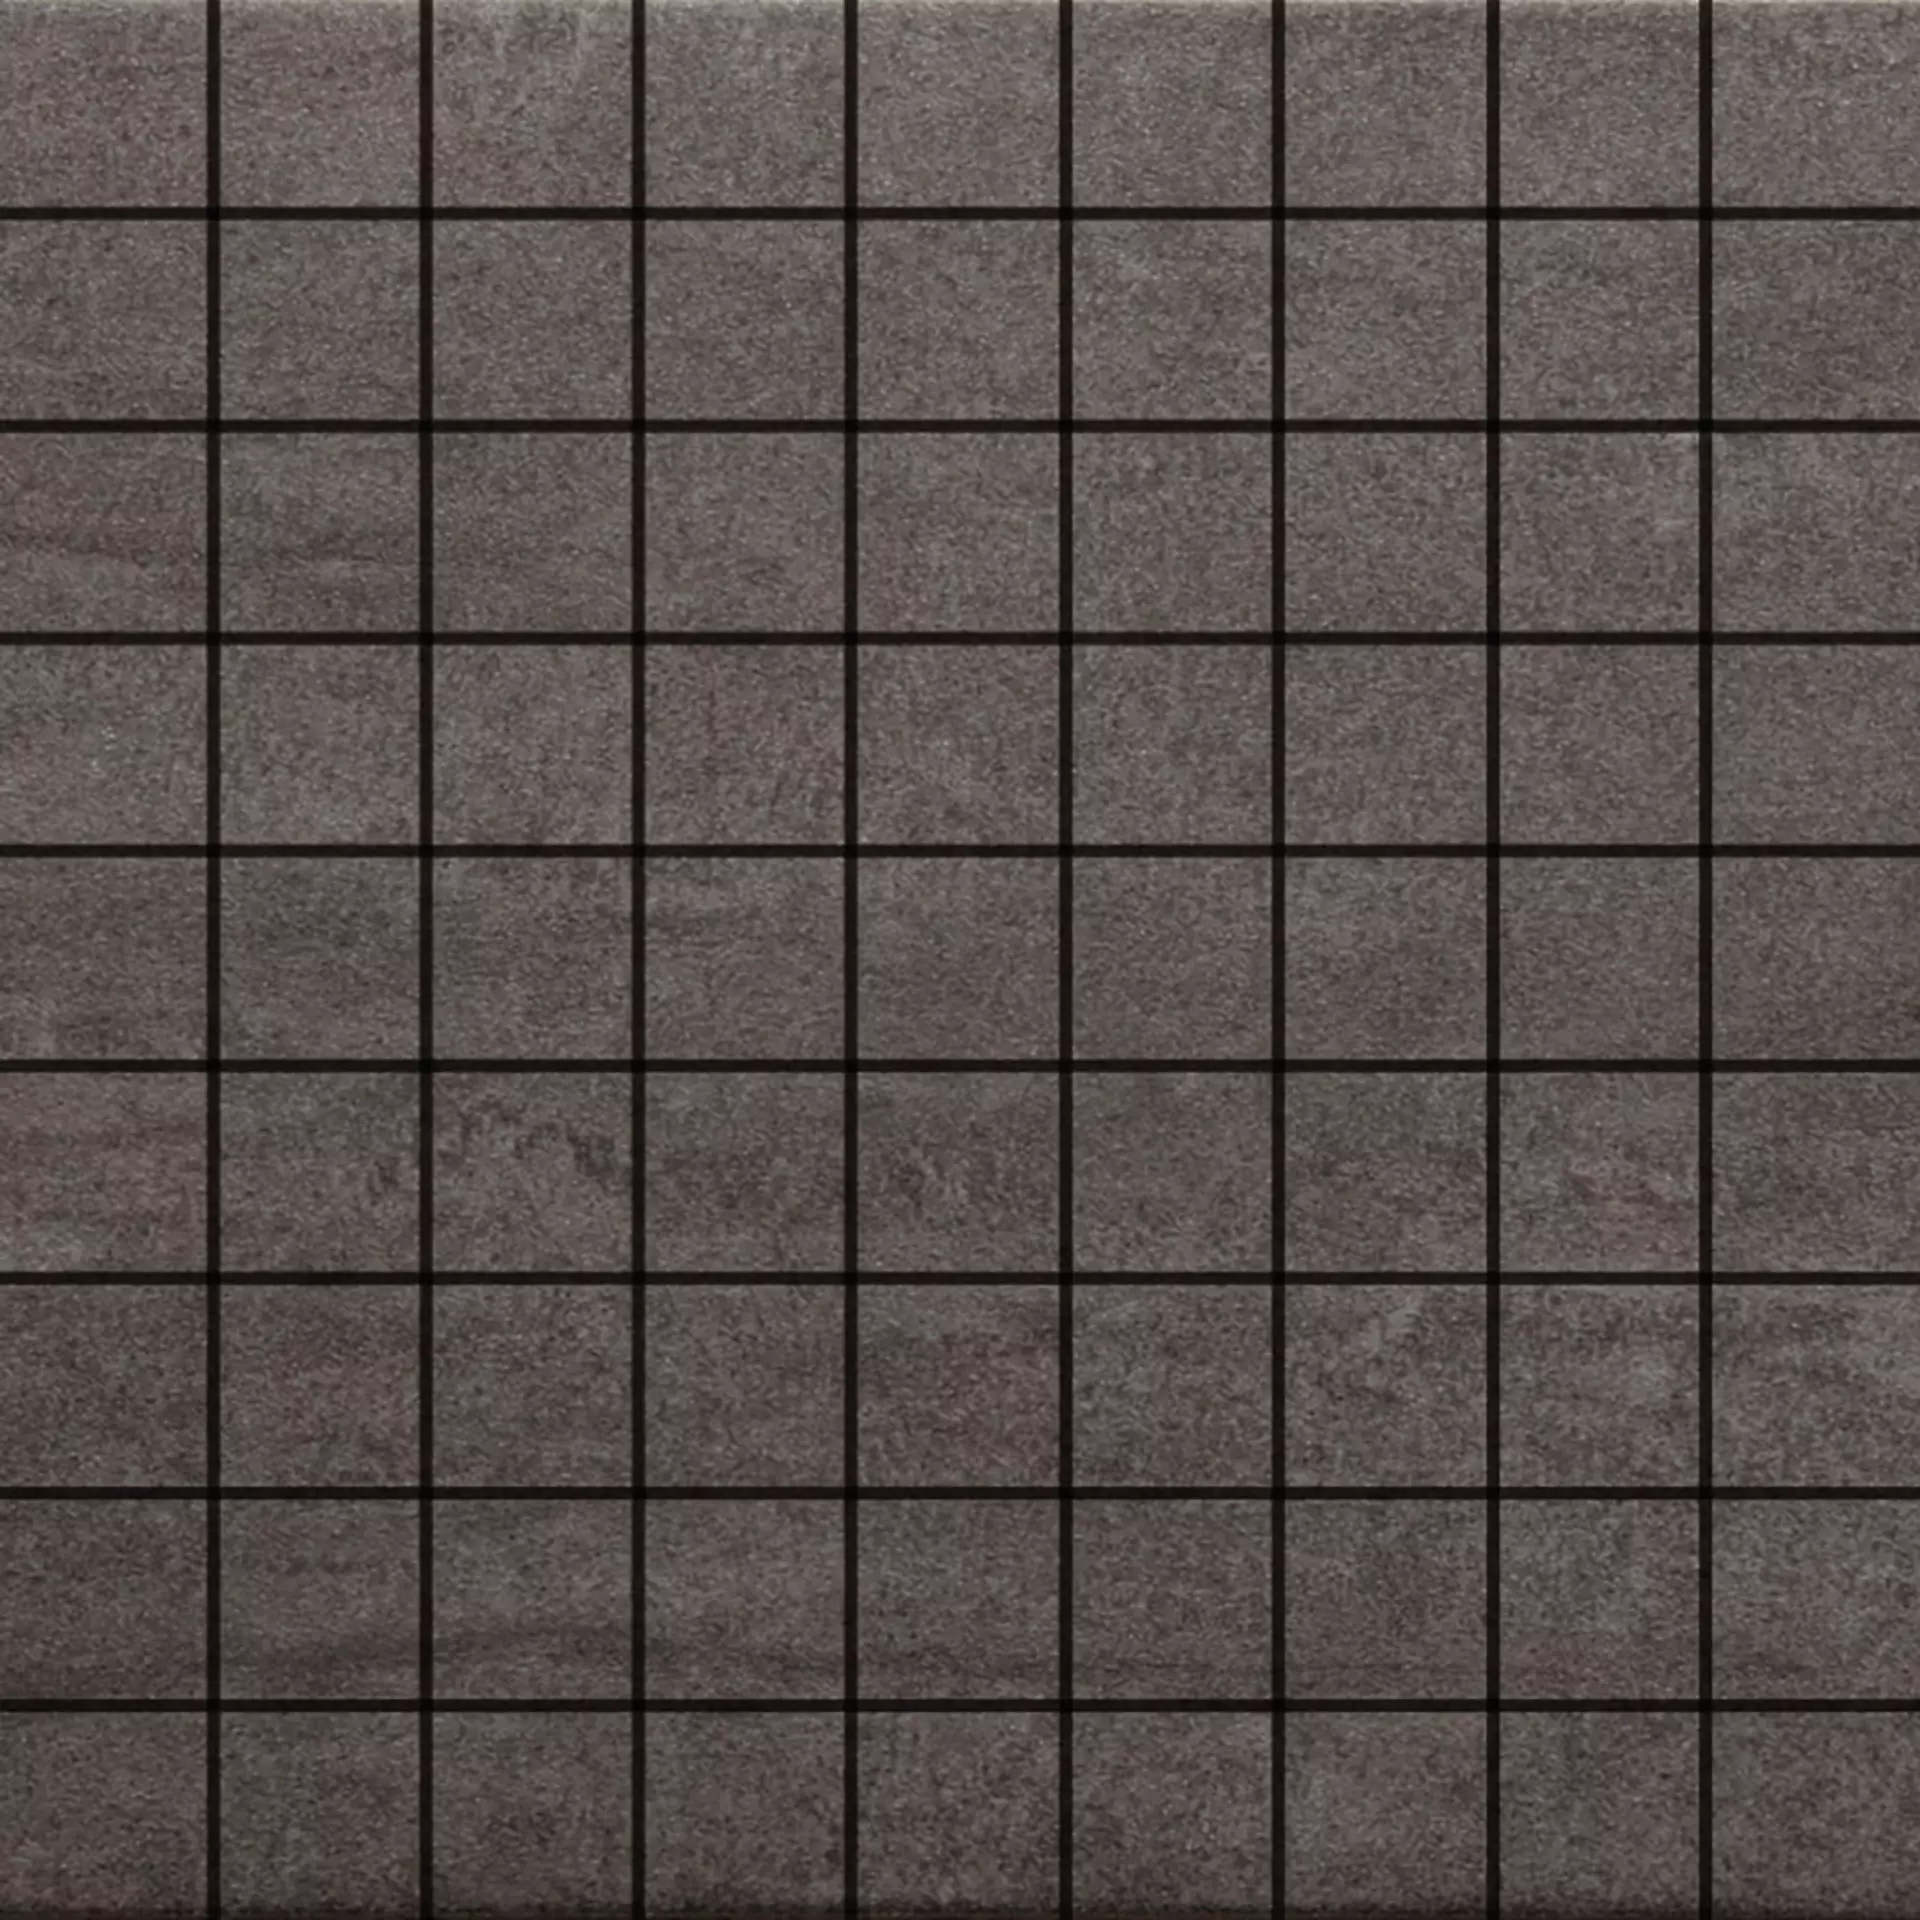 Rondine Contract Grey Naturale Mosaic J83767 30x30cm 9,5mm